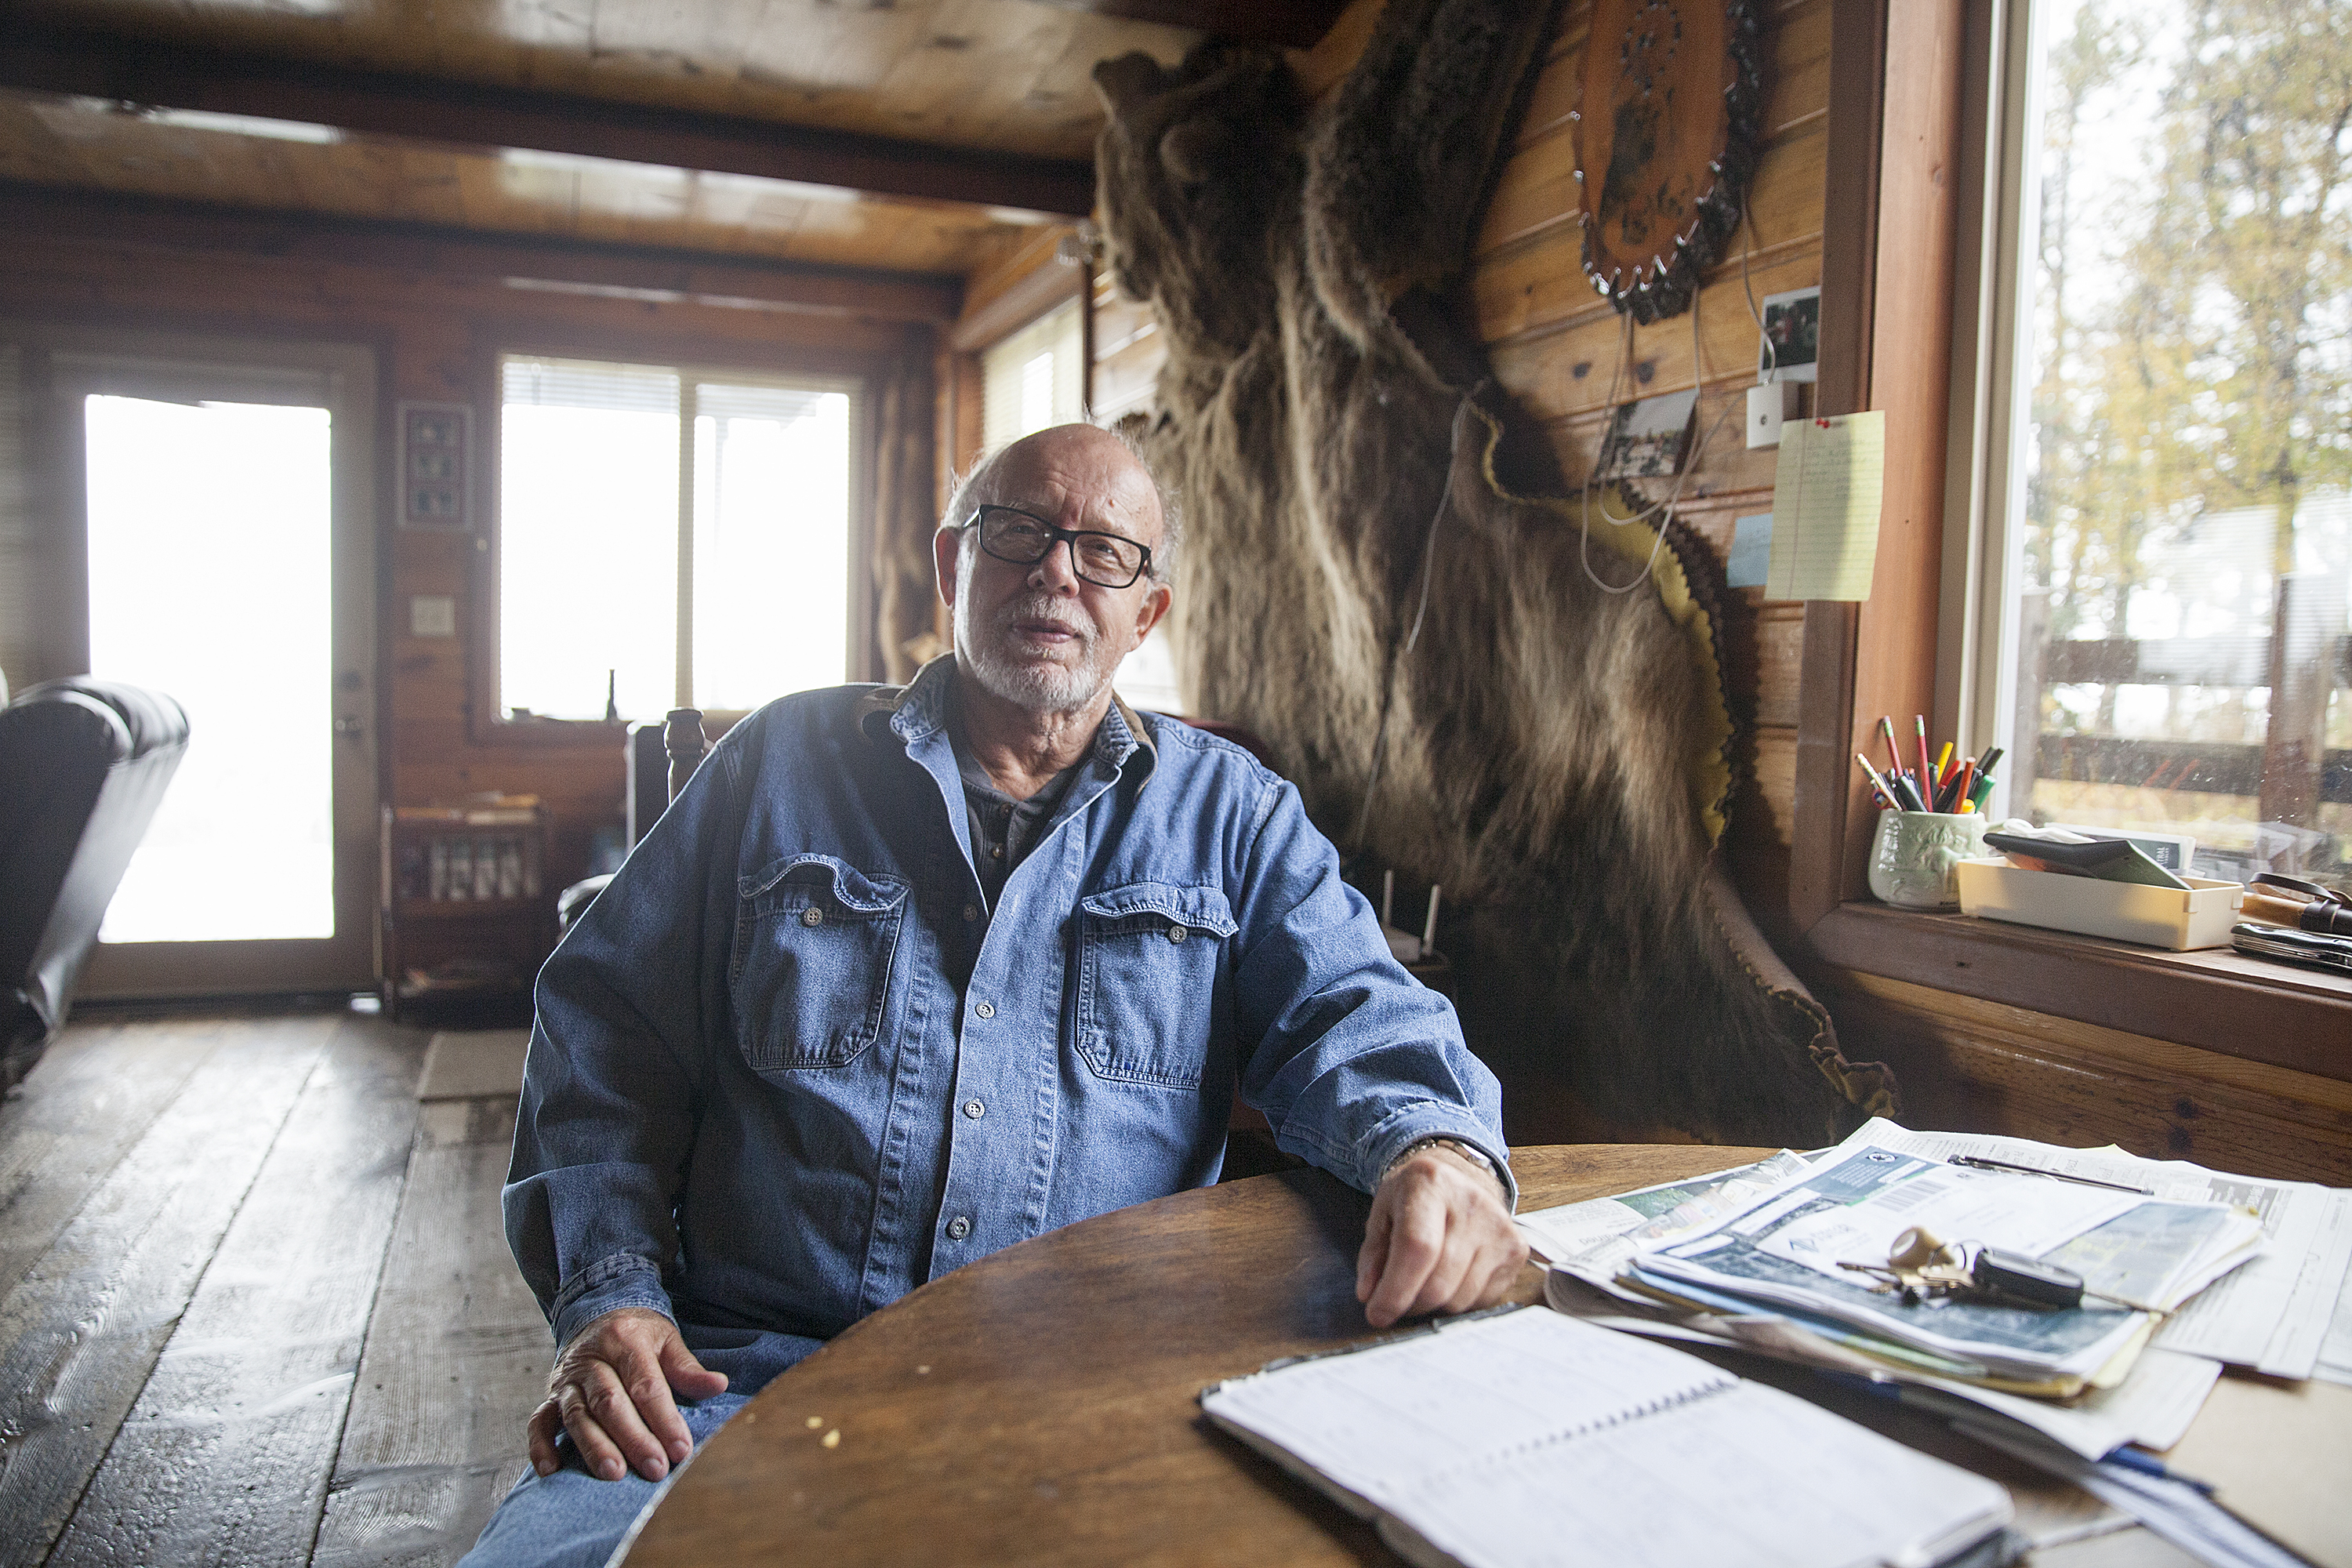 Bill Warren, in the home on land he says he was negotiating to sell to the Alaska LNG project on Sept. 25, 2016 in Nikiski, Alaska. Warren, and others in Nikiski, say they are unsure what will happen to their land as the project transitions to state control. (Photo by Rashah McChesney, Alaska’s Energy Desk - Juneau)